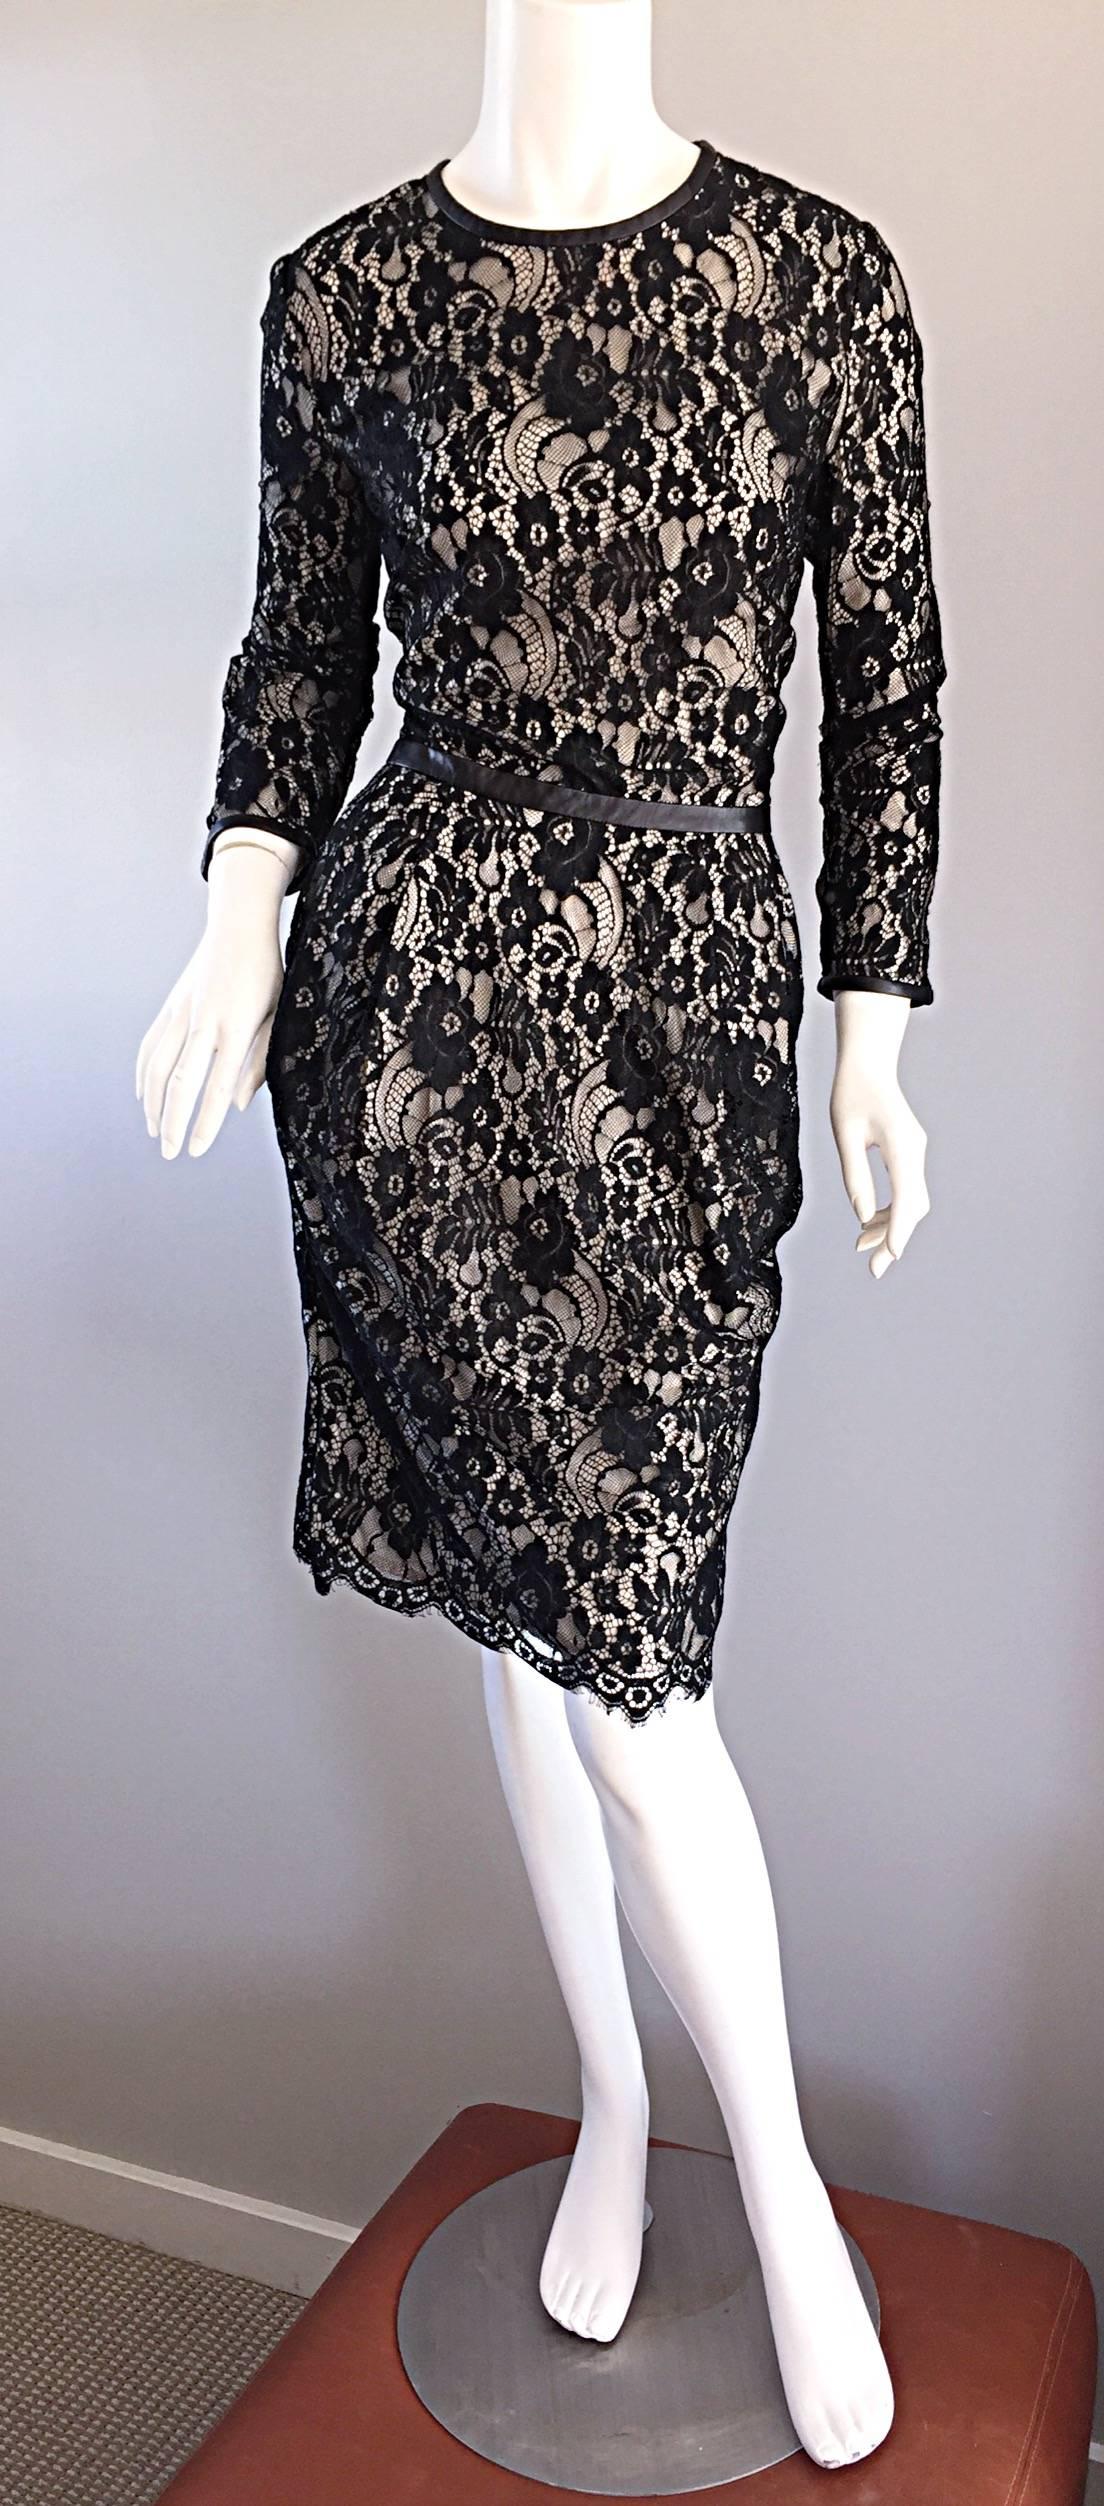 Narcisco Rodriguez Black + Nude French Lace Dress w/ Leather Accents  In Excellent Condition For Sale In San Diego, CA